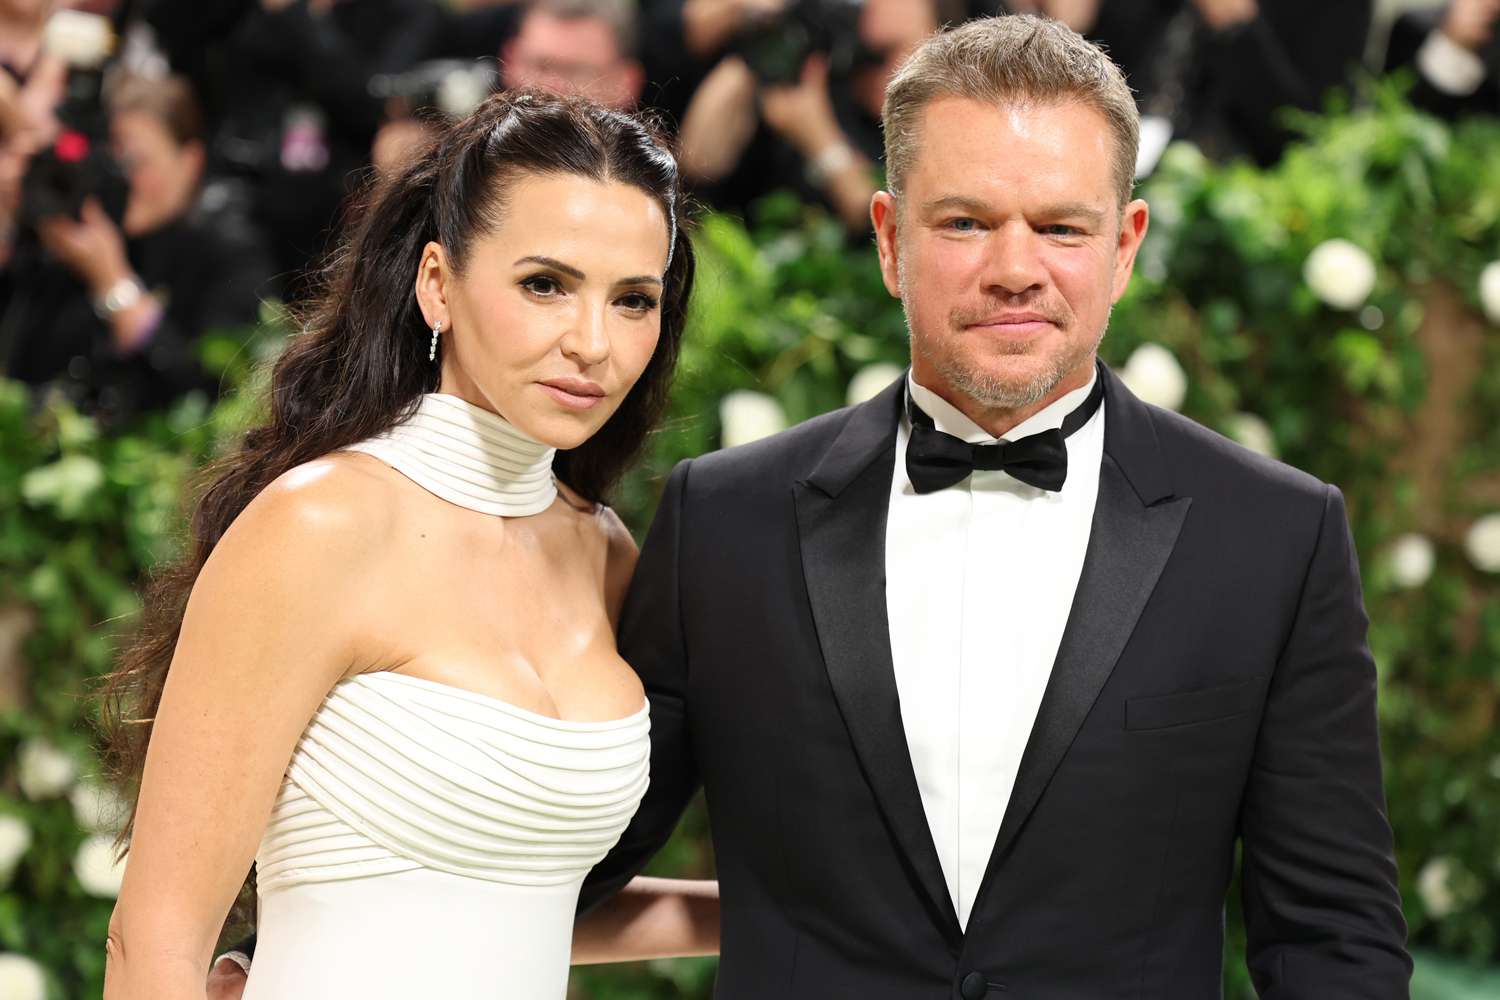 Matt and Luciana Damon Have Glam Met Gala Date — and He Jokes It Only Took '5 Minutes' to Get Ready! (Exclusive)